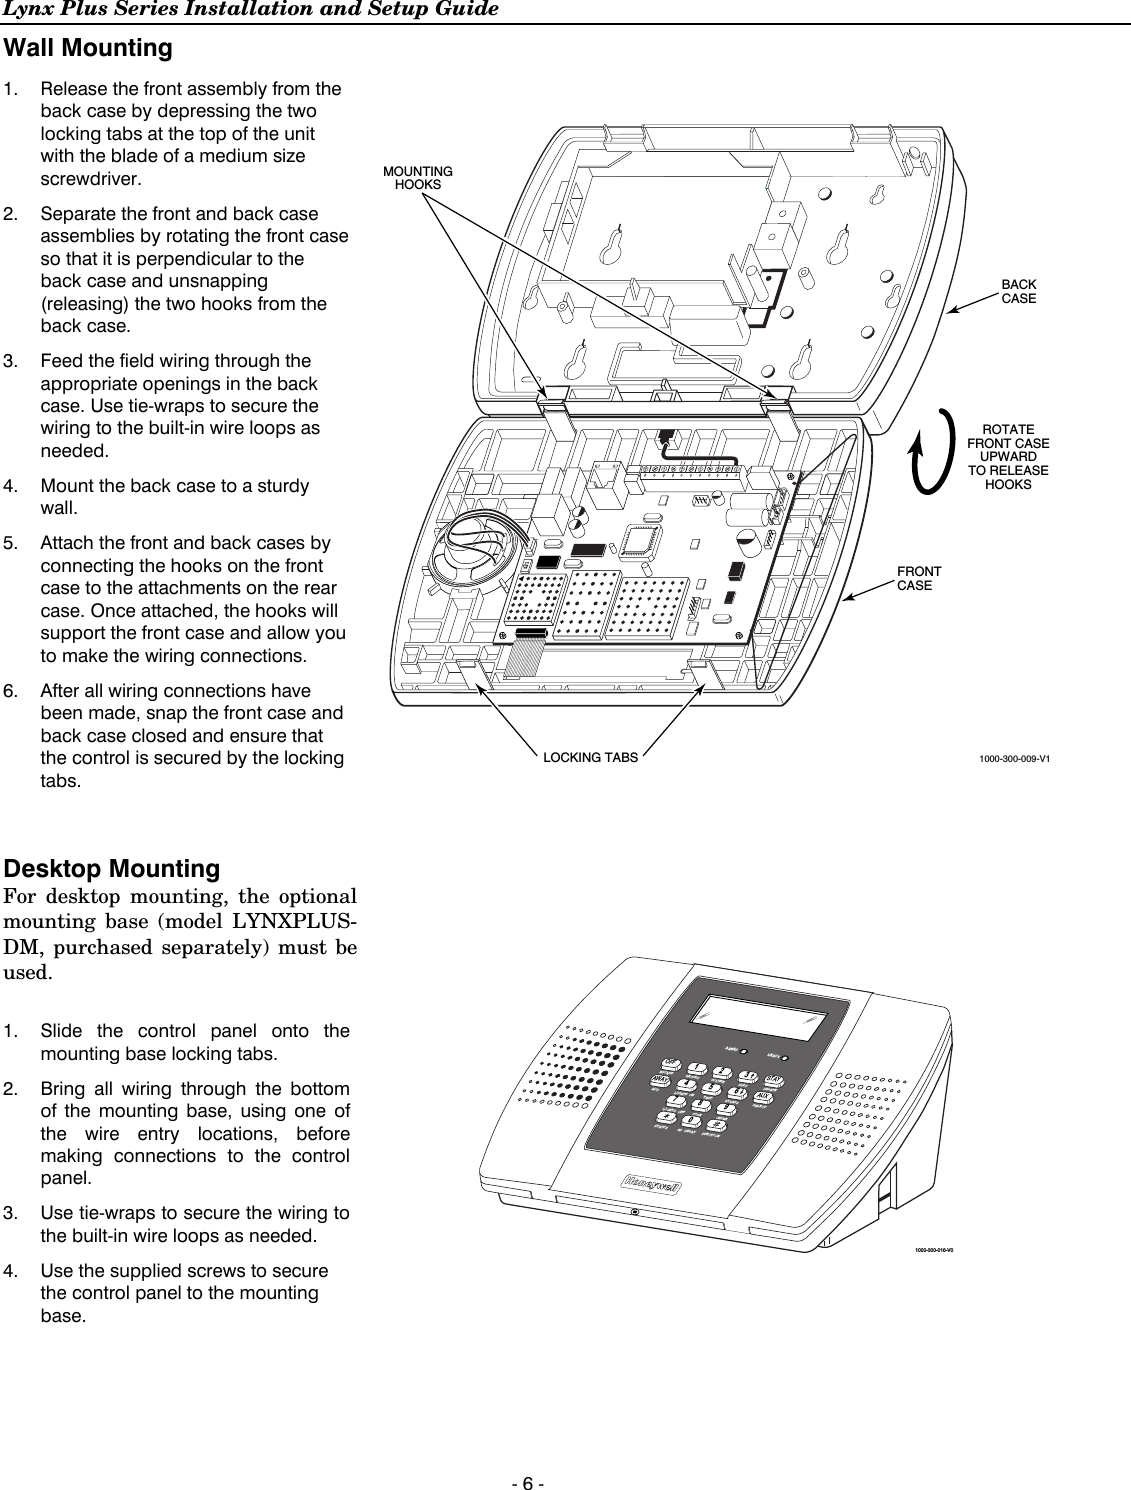 Lynx Plus Series Installation and Setup Guide  - 6 - Wall Mounting  1.  Release the front assembly from the back case by depressing the two locking tabs at the top of the unit with the blade of a medium size screwdriver. 2.  Separate the front and back case assemblies by rotating the front case so that it is perpendicular to the back case and unsnapping (releasing) the two hooks from the back case.  3.   Feed the field wiring through the appropriate openings in the back case. Use tie-wraps to secure the wiring to the built-in wire loops as needed. 4.   Mount the back case to a sturdy wall. 5.  Attach the front and back cases by connecting the hooks on the front case to the attachments on the rear case. Once attached, the hooks will support the front case and allow you to make the wiring connections. 6.  After all wiring connections have been made, snap the front case and back case closed and ensure that the control is secured by the locking tabs.  BACKCASEFRONTCASE1000-300-009-V1ROTATEFRONT CASEUPWARDTO RELEASEHOOKSMOUNTINGHOOKSLOCKING TABS  Desktop Mounting For desktop mounting, the optional mounting base (model LYNXPLUS-DM, purchased separately) must be used.  1.  Slide the control panel onto the mounting base locking tabs. 2.  Bring all wiring through the bottom of the mounting base, using one of the wire entry locations, before making connections to the control panel. 3.  Use tie-wraps to secure the wiring to the built-in wire loops as needed.  4.  Use the supplied screws to secure the control panel to the mounting base.  BYPASSNO DELAYRECORDTESTFUNCTIONSTATUSVOLUME PLAYCODELIGHTS ONLIGHTS OFF CHIMEESCAPEADDDELETESELECTOFF STAY132AWAY AUX465ARMED READY79801000-300-016-V0  